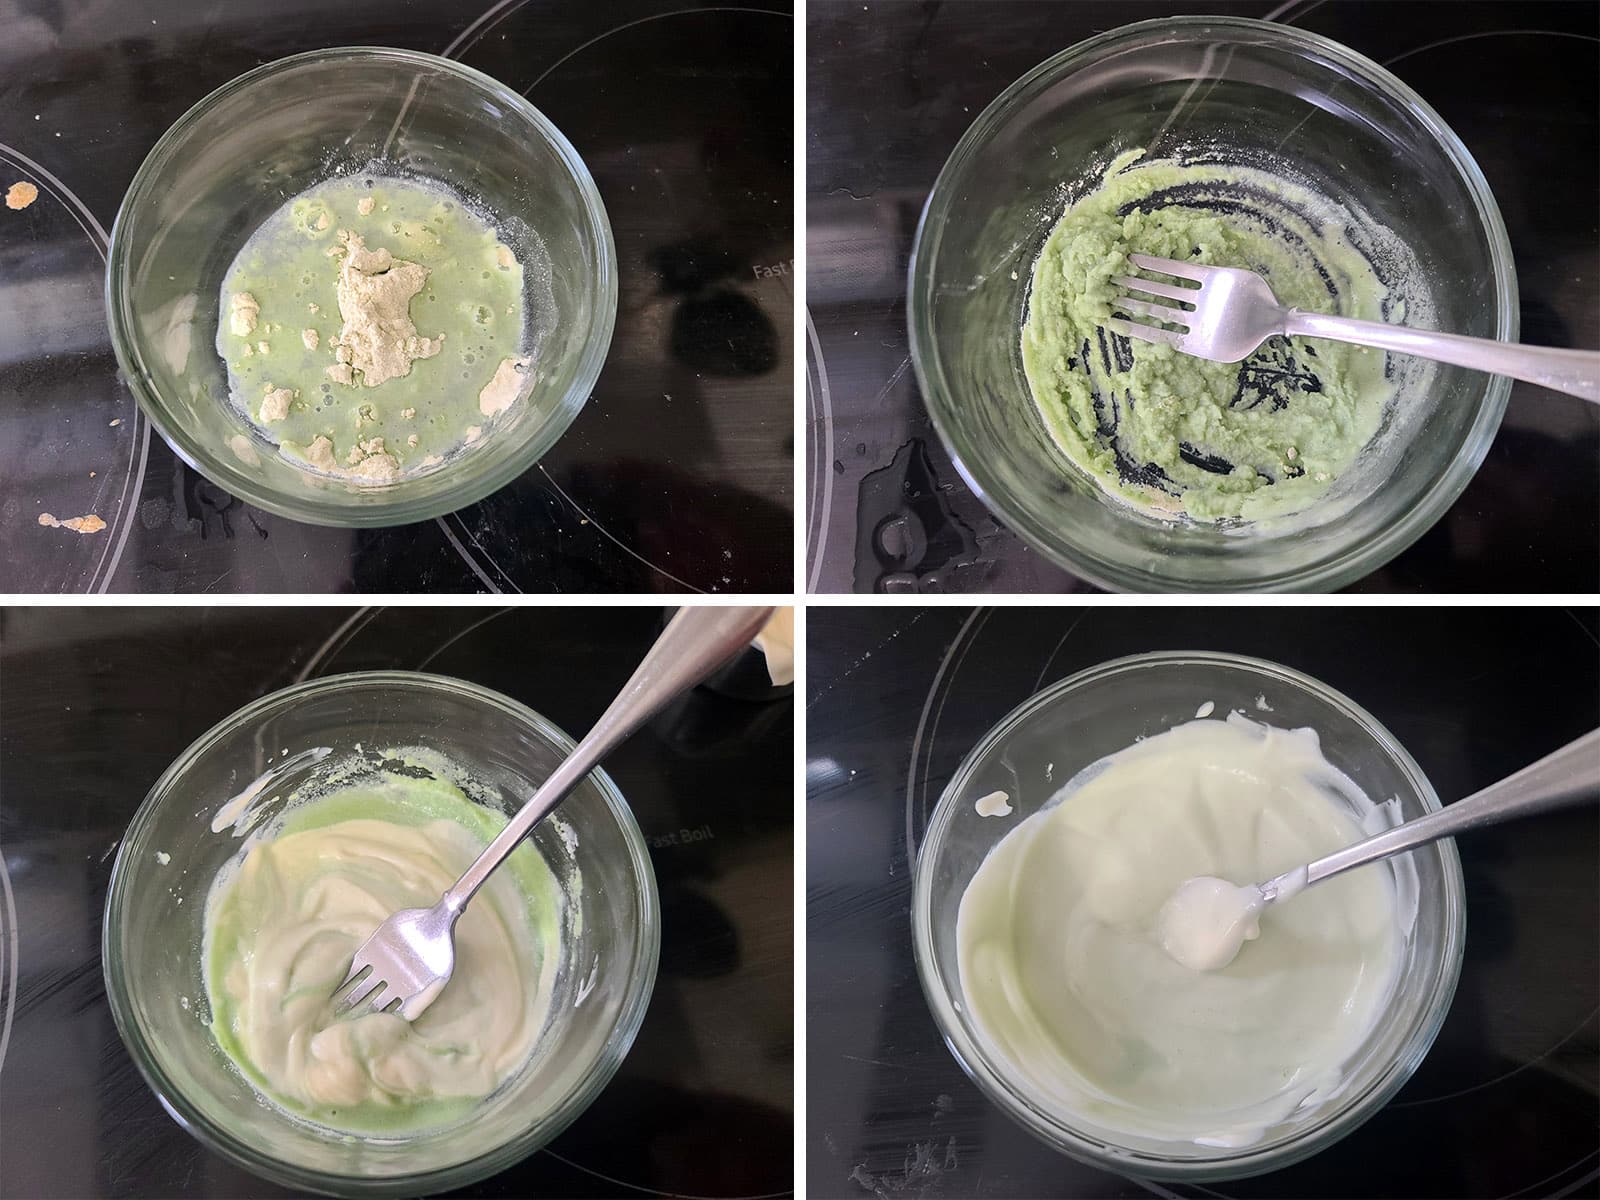 A 4 part image showing the wasabi mayo being made.